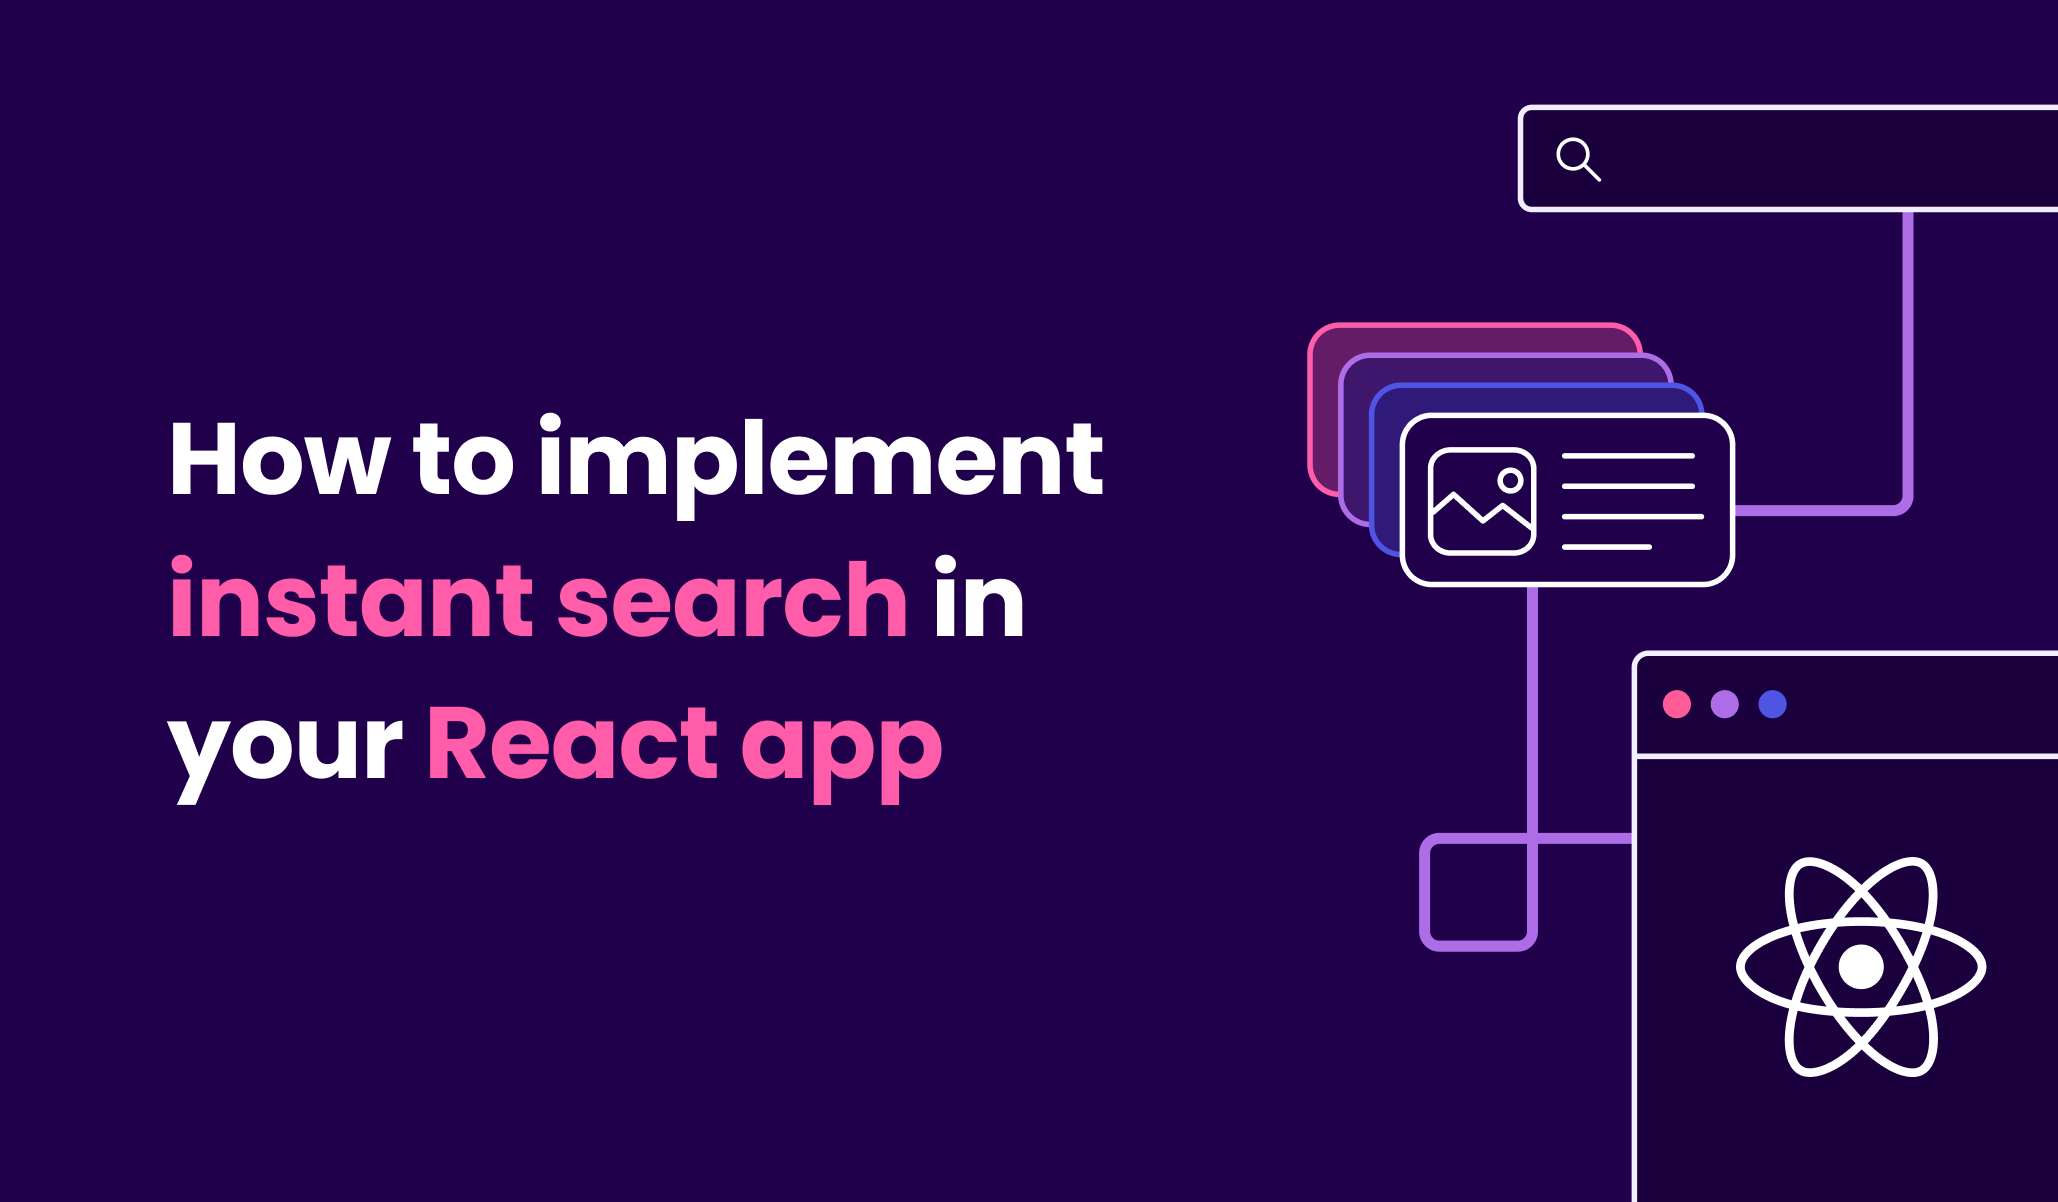 How to implement instant search in your React app